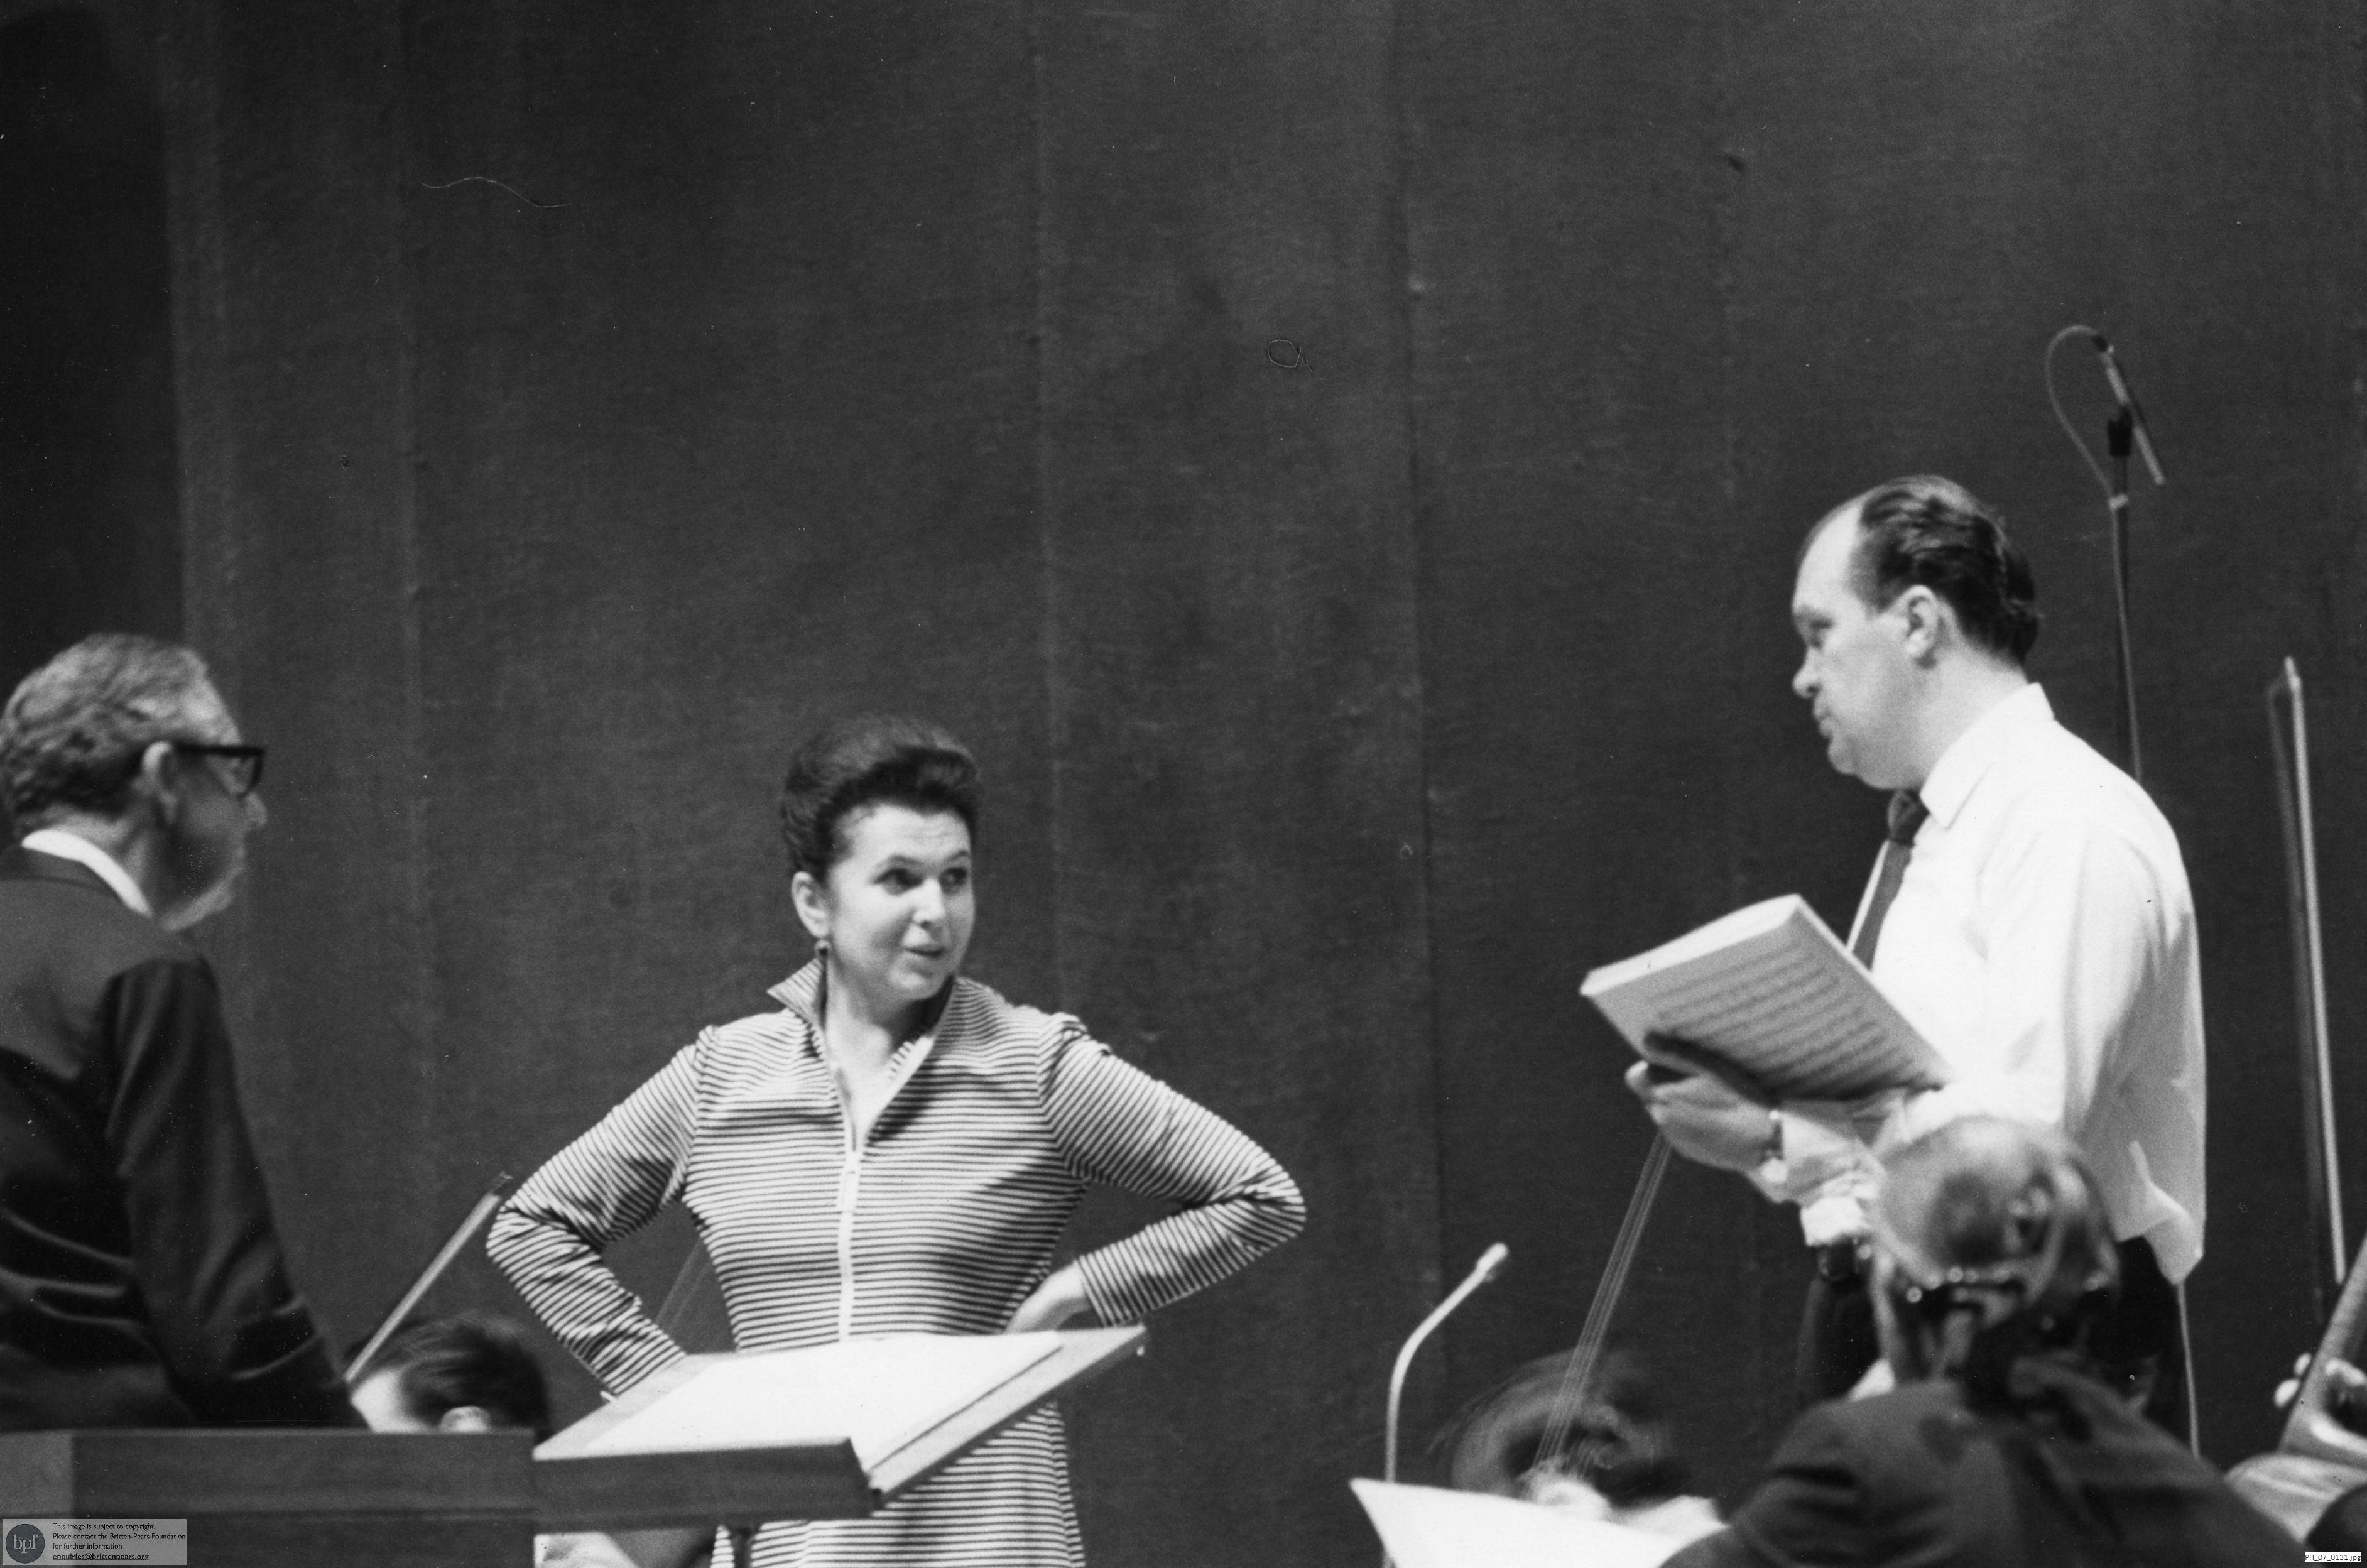 Benjamin Britten conducting a rehearsal in Snape Maltings Concert Hall